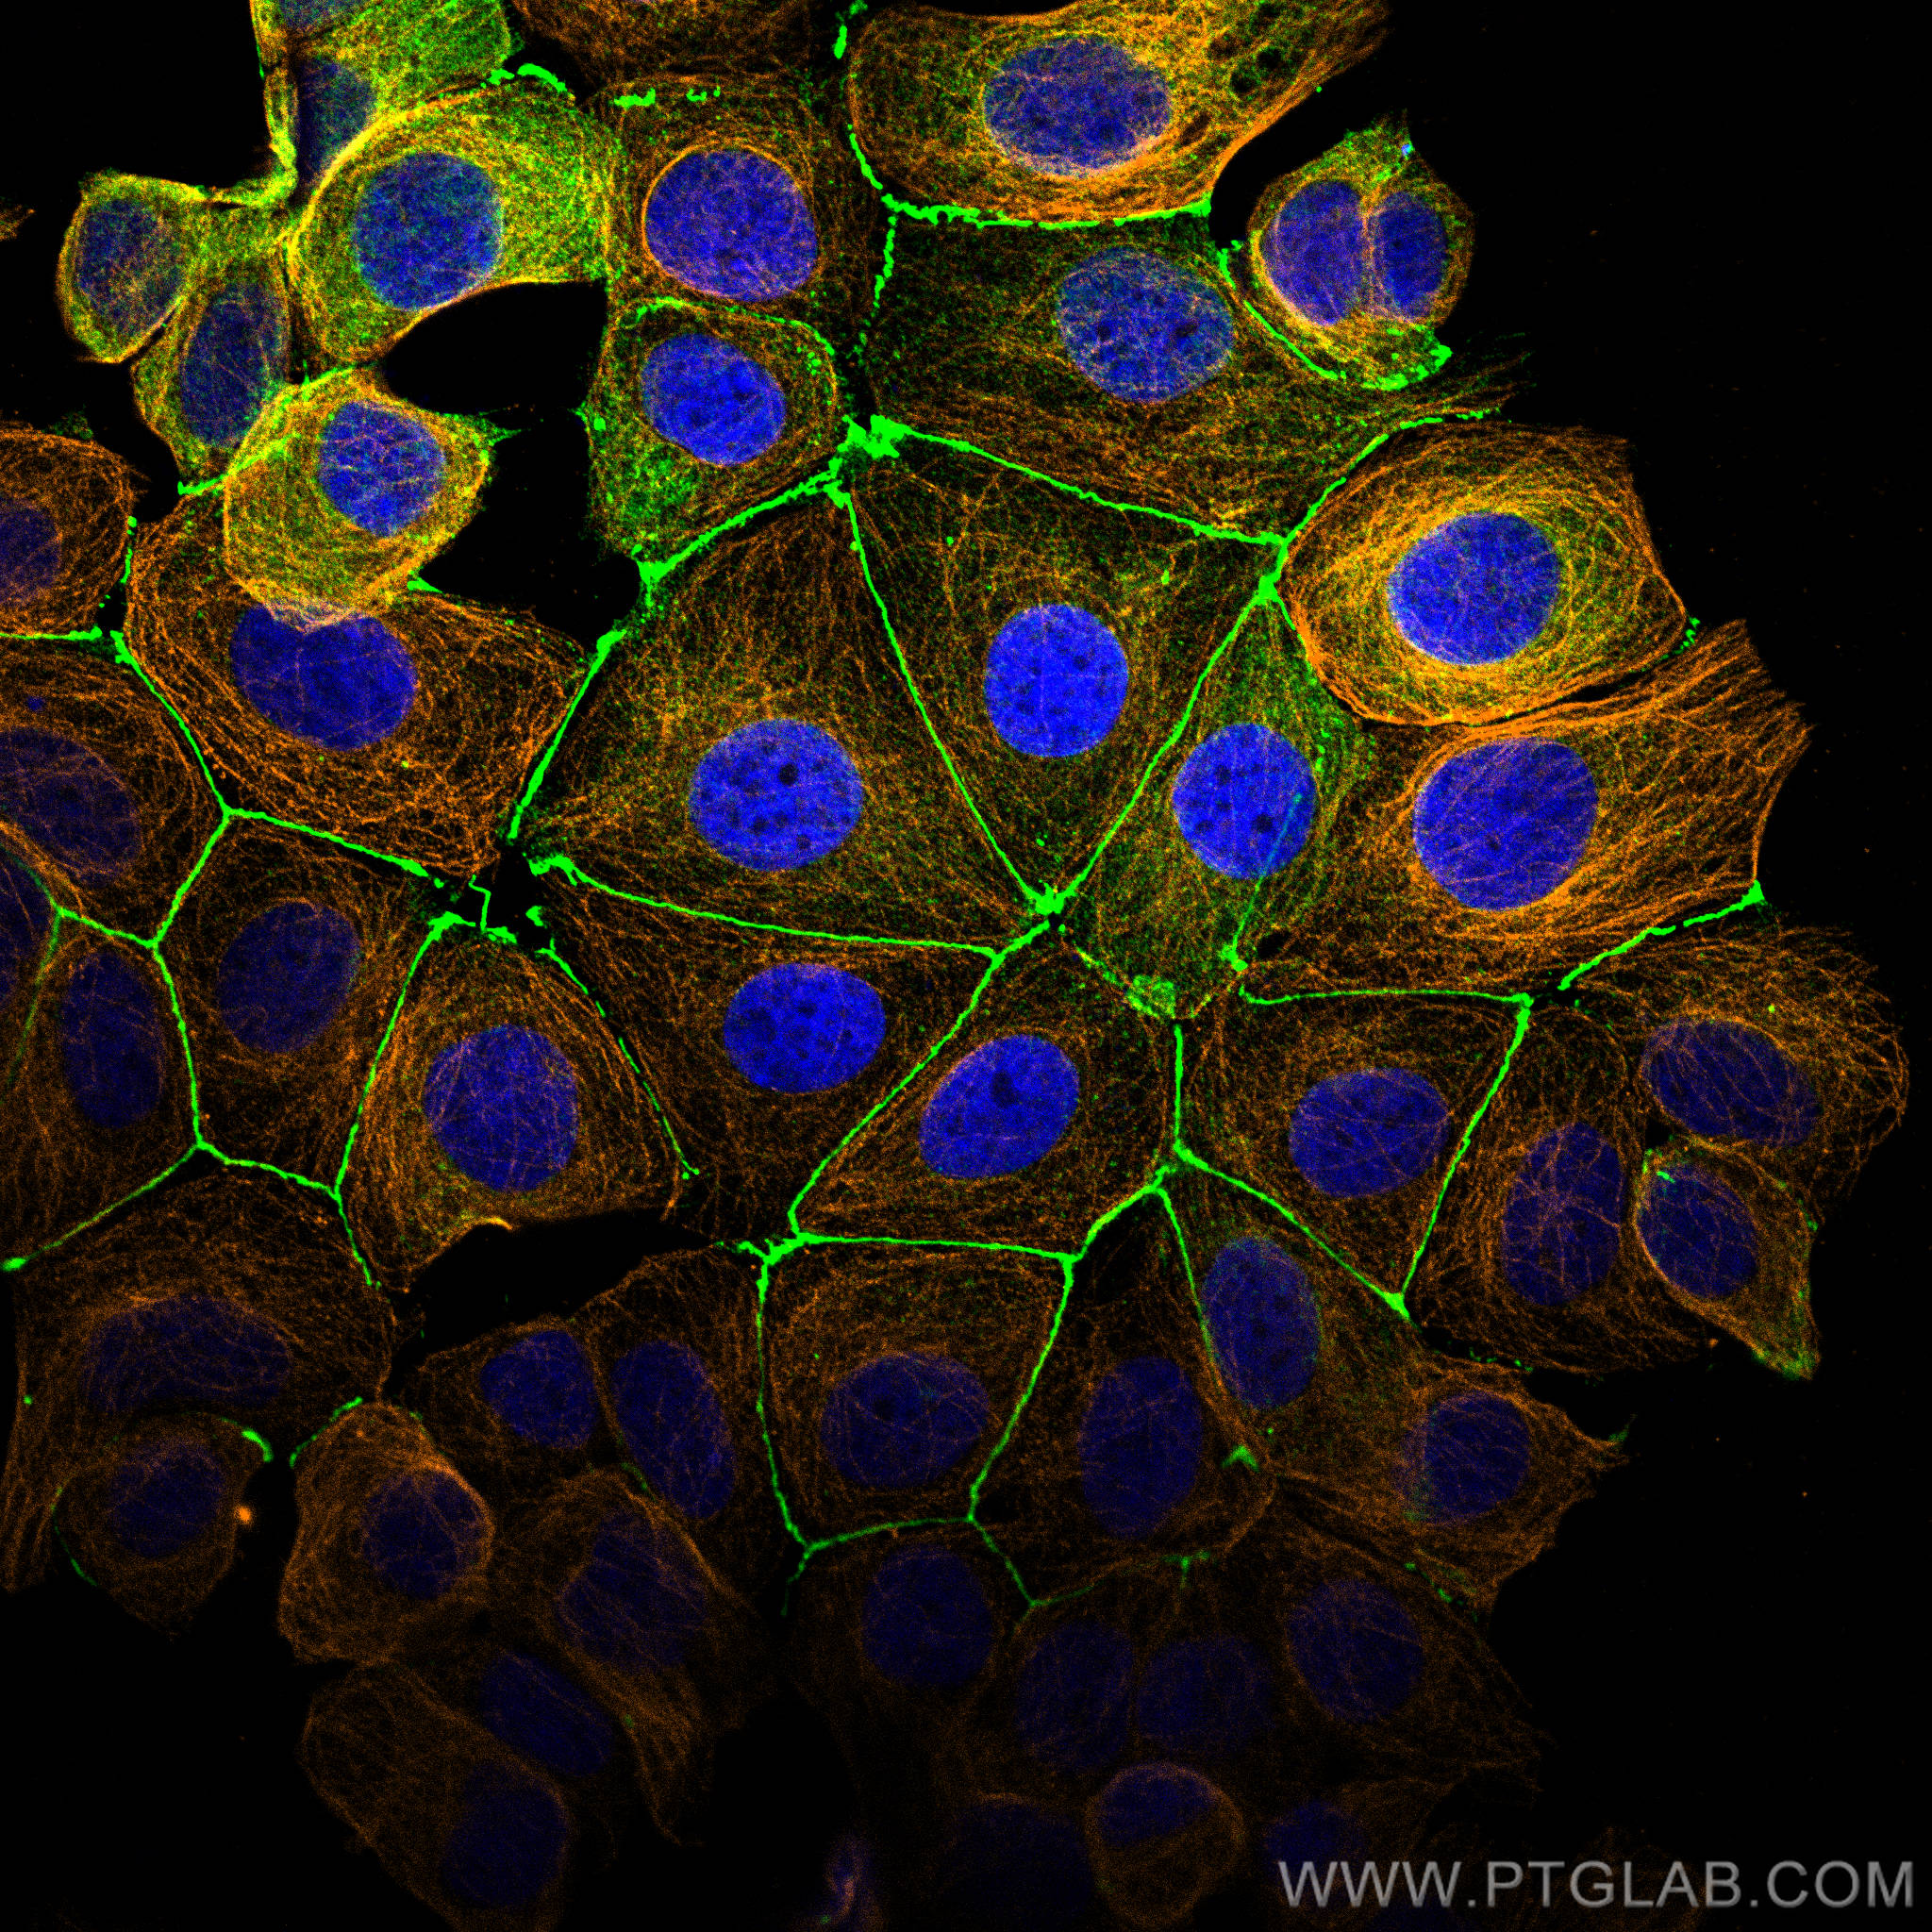 Immunofluorescence of MCF-7 cells: MCF-7 cells were fixed with 4% PFA and stained with Rabbit anti-ZO1 polyclonal antibody (21773-1-AP, 1:2000, green) and mouse anti-Alpha Tubulin monoclonal antibody (66031-1-Ig, 1:1000, orange). Multi-rAb CoraLite® Plus 488-Goat Anti-Rabbit Recombinant Secondary Antibody (H+L) (RGAR002, 1:500) and Multi-rAb CoraLite® Plus 555-Goat Anti-Mouse Recombinant Secondary Antibody (H+L) (RGAM003, 1:500) were used for detection. 